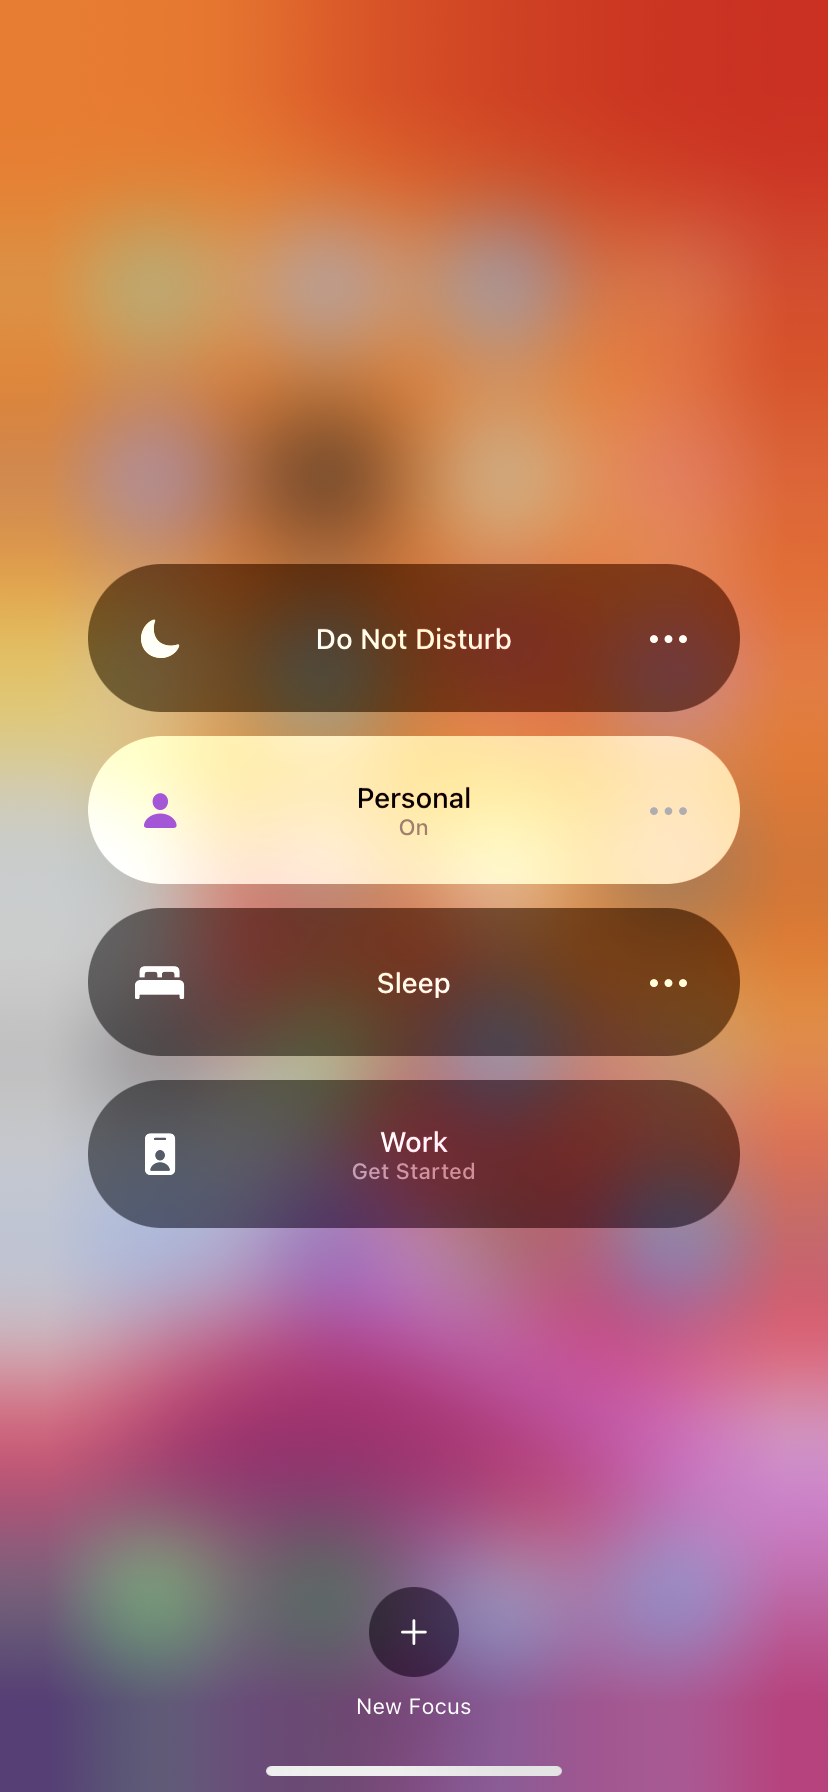 An iPhone screenshot showing four ovals, labeled Do Not Disturb, Personal, Sleep, and Work. Personal is highlighted.